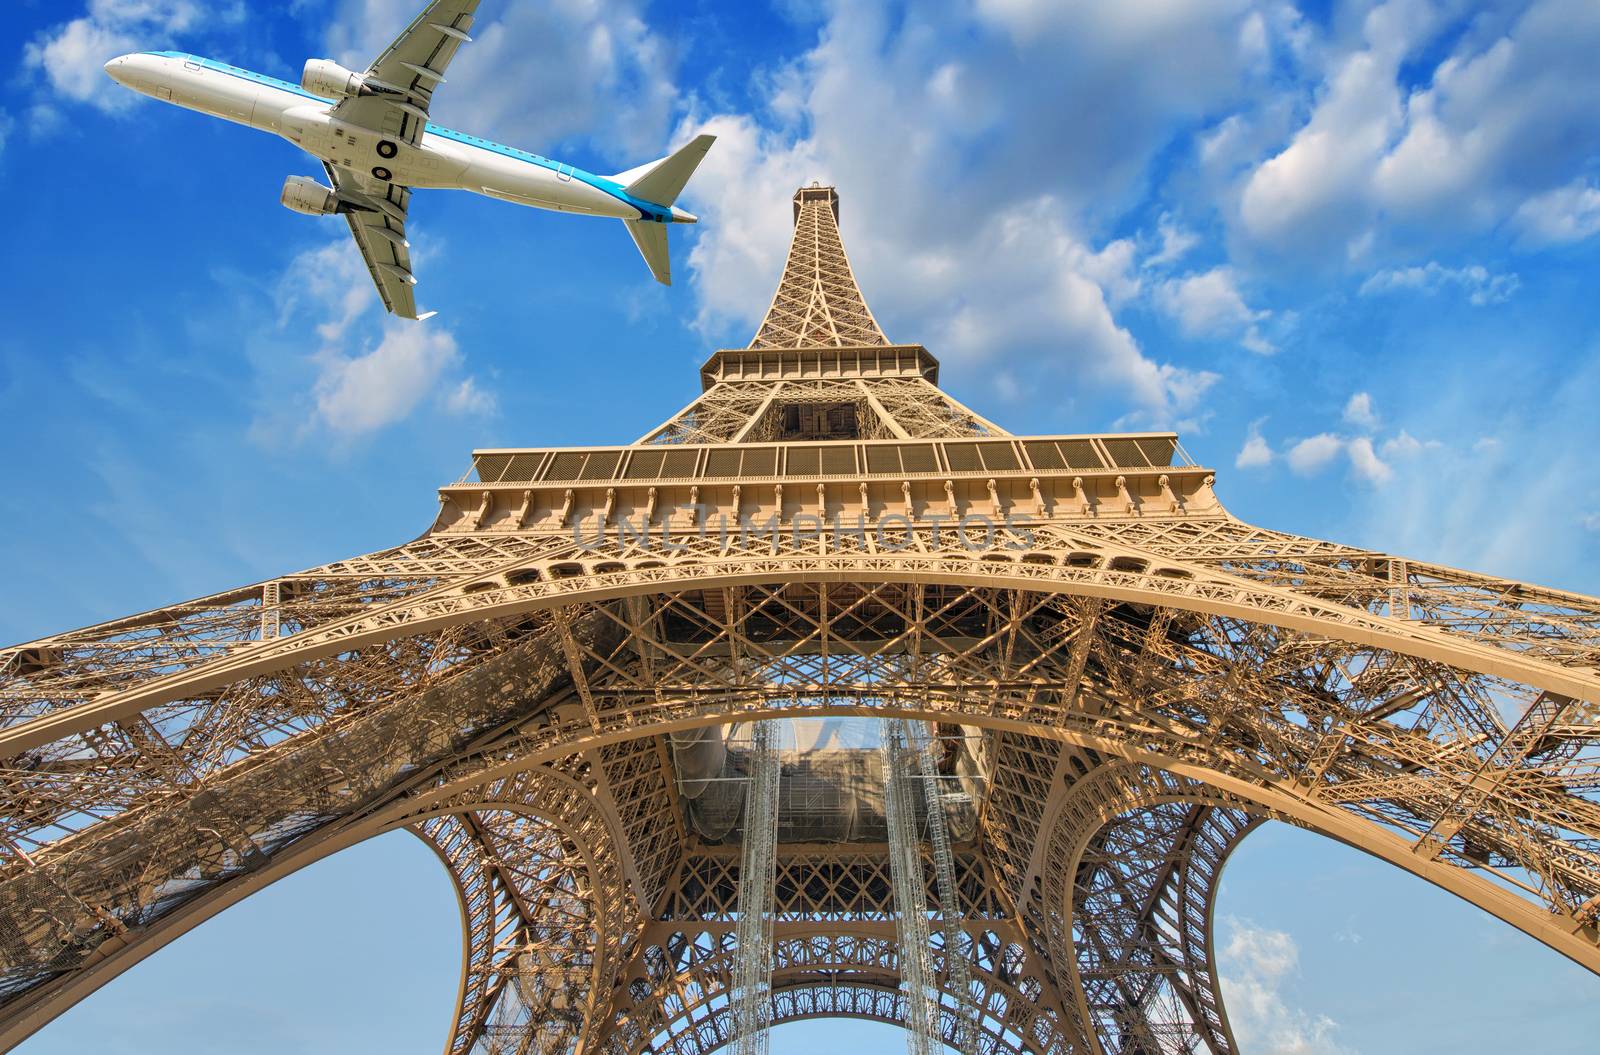 Airplane over Paris, France. Tourism and vacation concept.